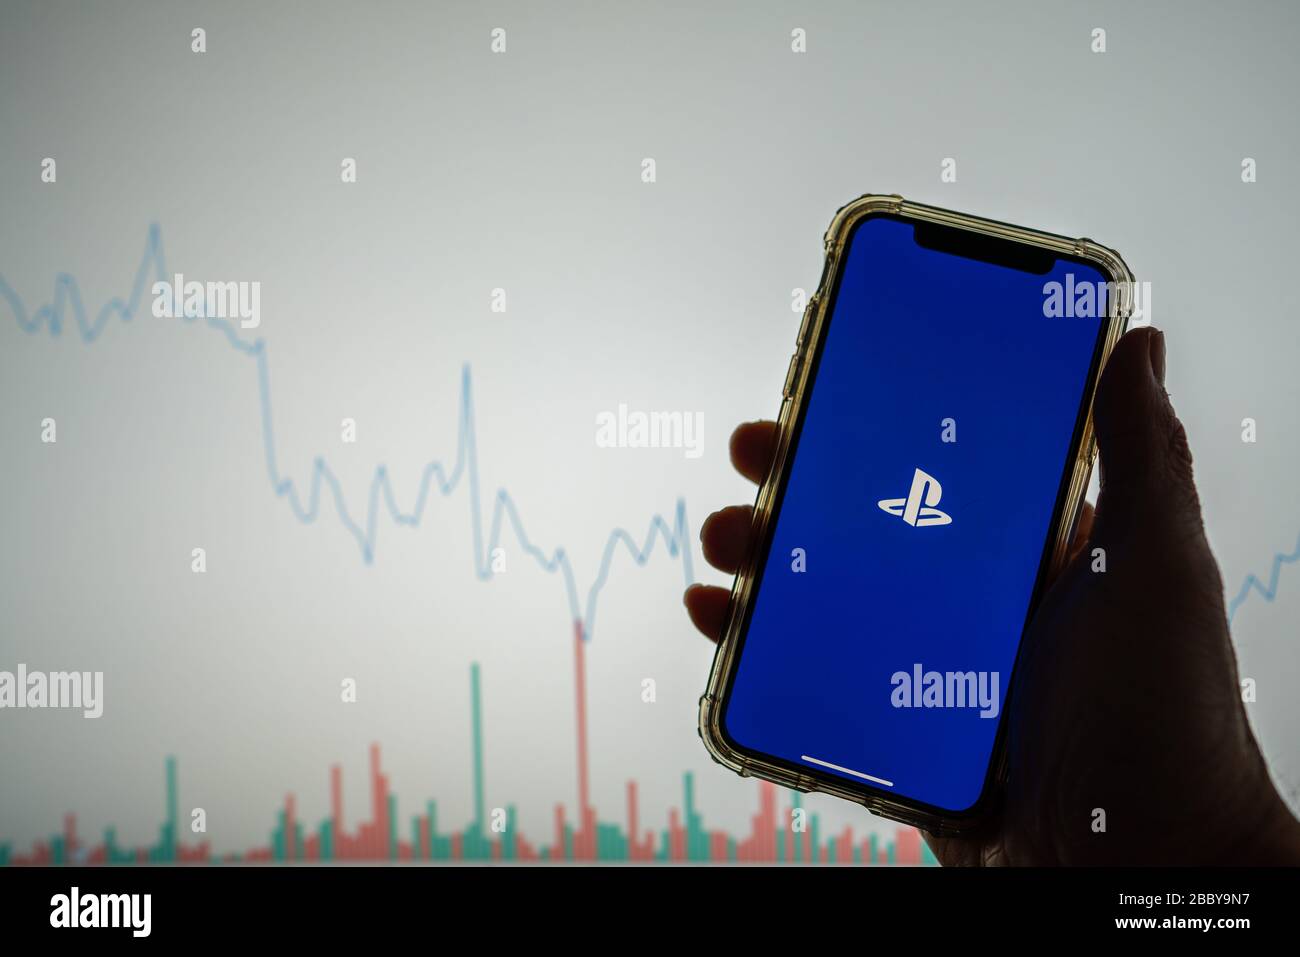 Sony Playstation mobile app logo on iPhone in front of white stock chart  Stock Photo - Alamy